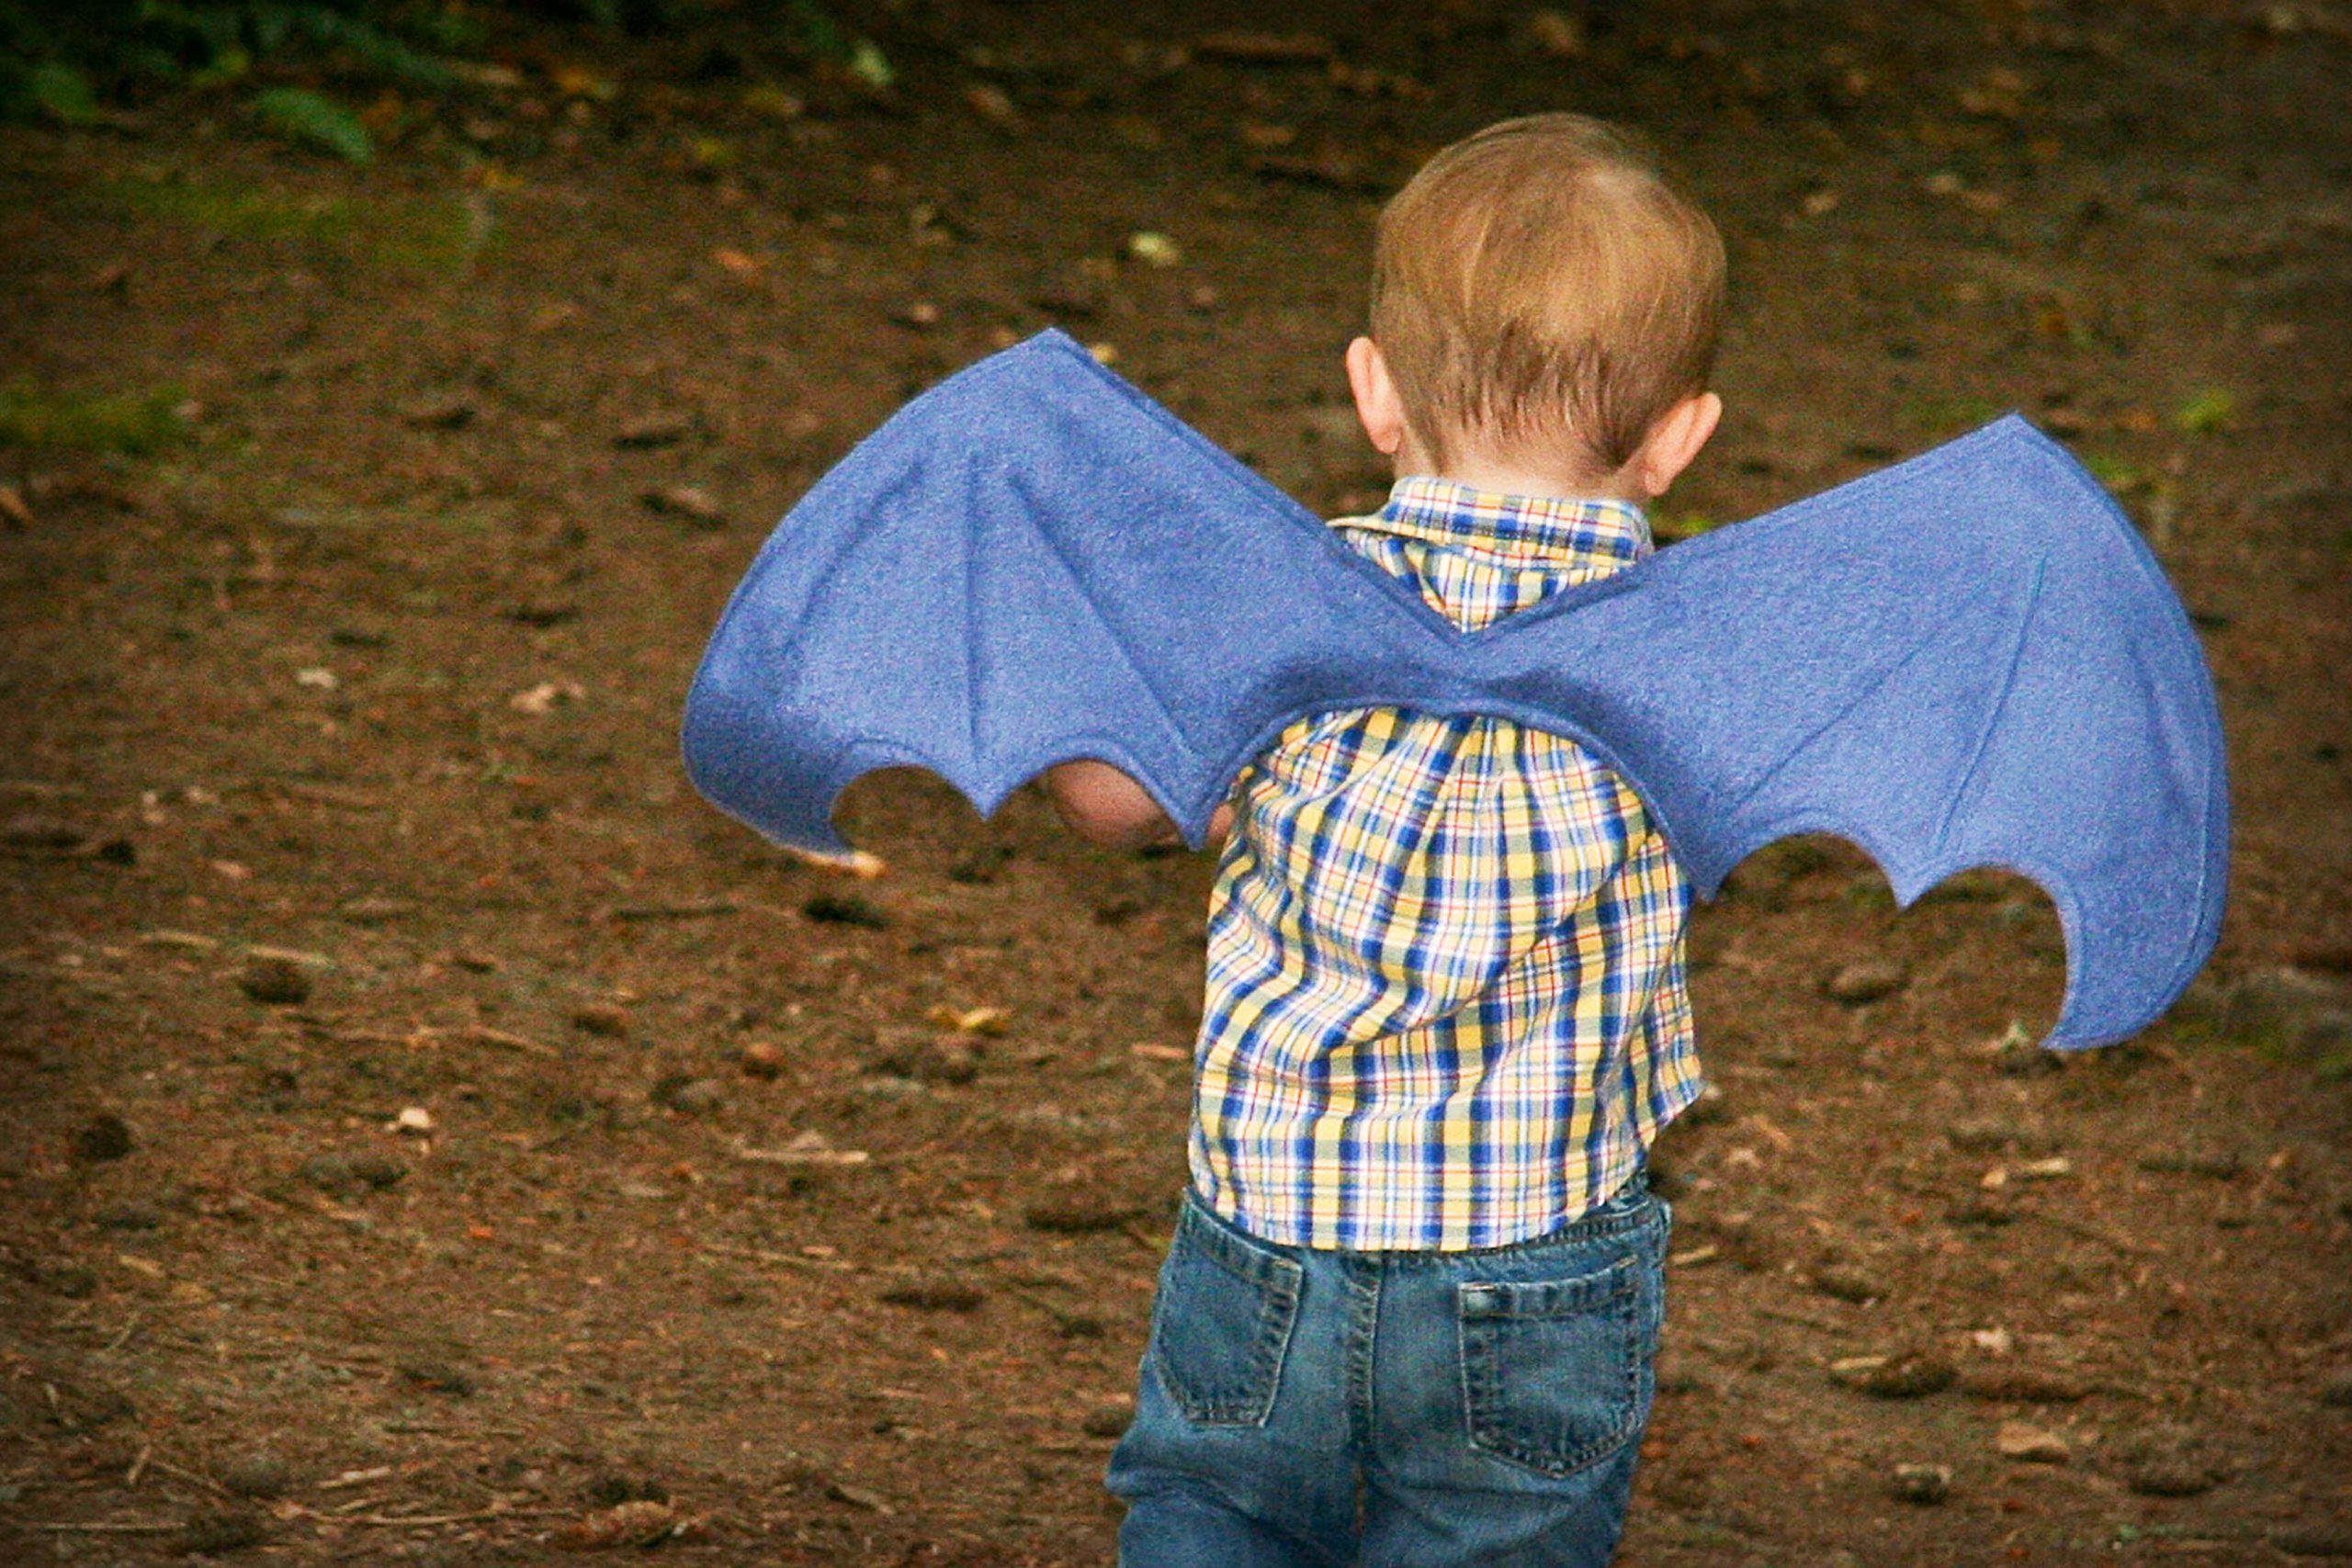 Fun To Make Dragon Wings For Toddlers Dragon Costume DIY Ideas for Kids 